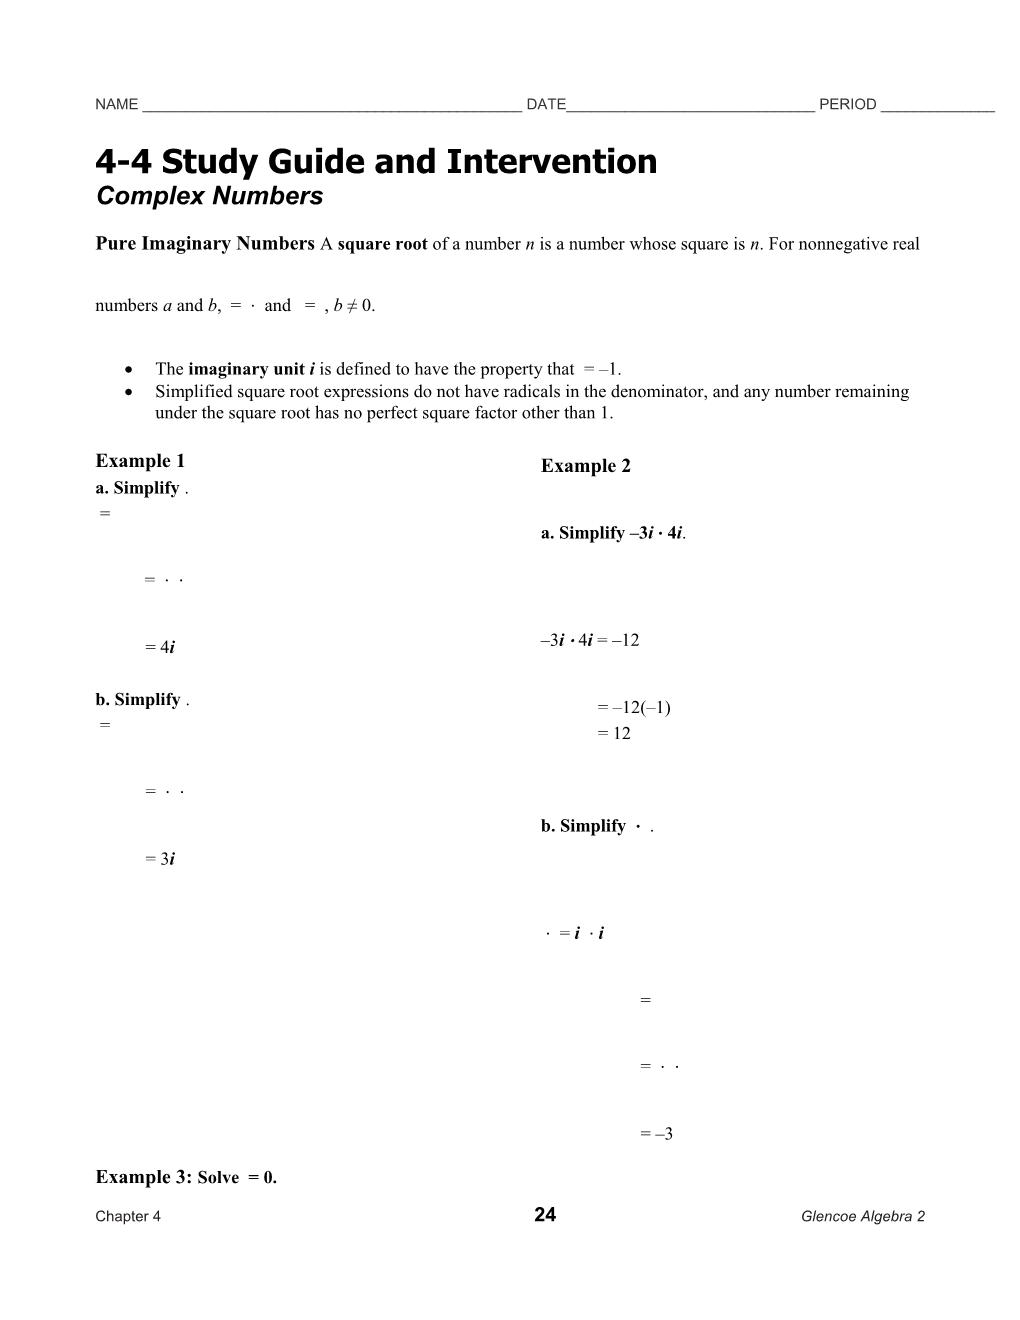 4-4 Study Guide and Intervention